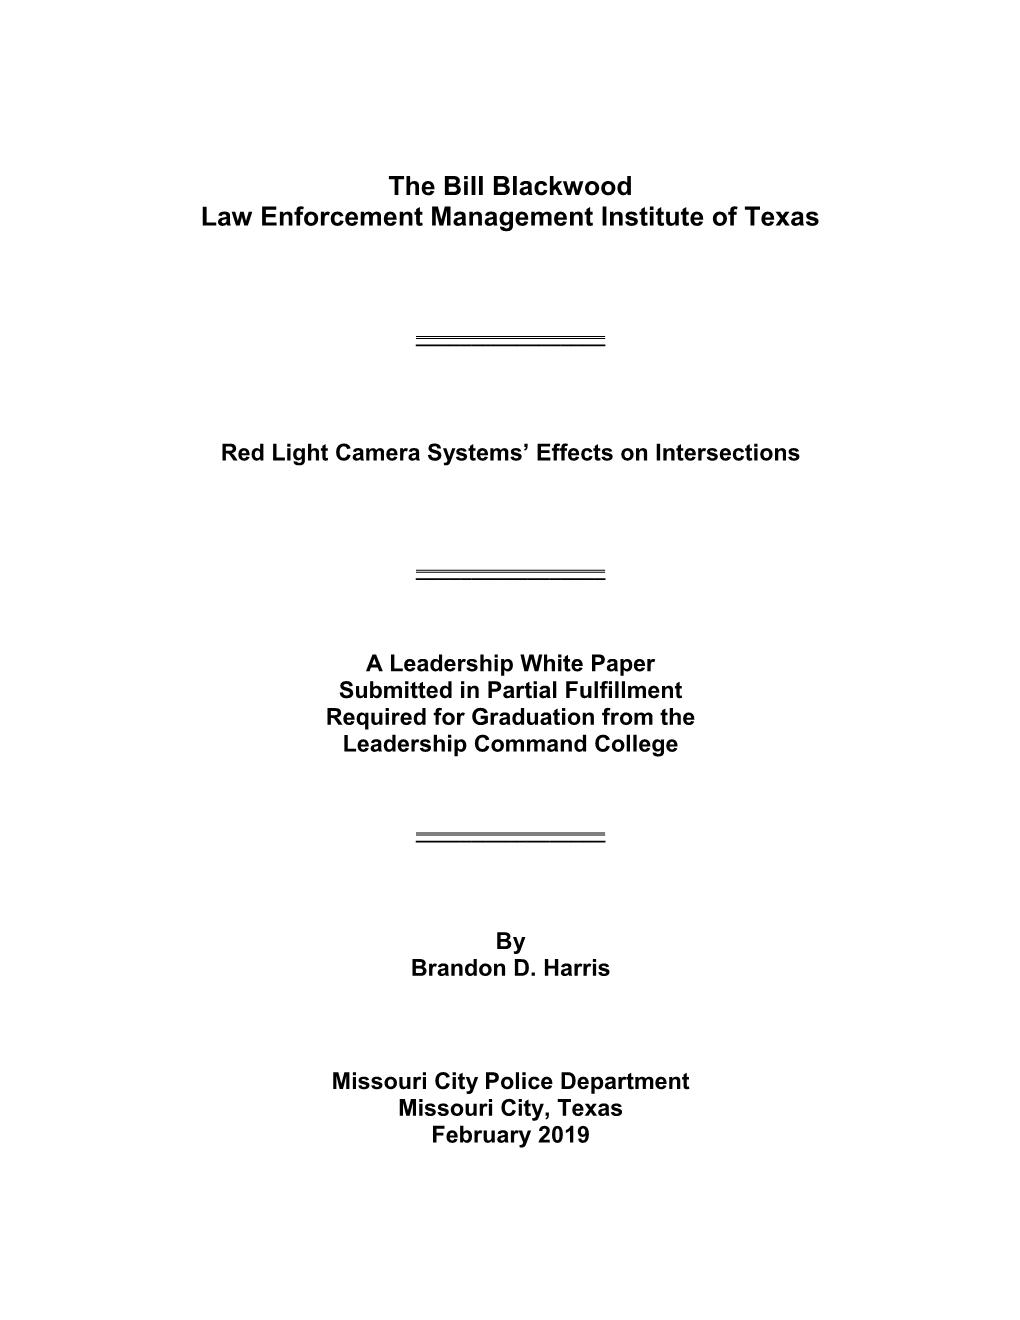 The Bill Blackwood Law Enforcement Management Institute of Texas